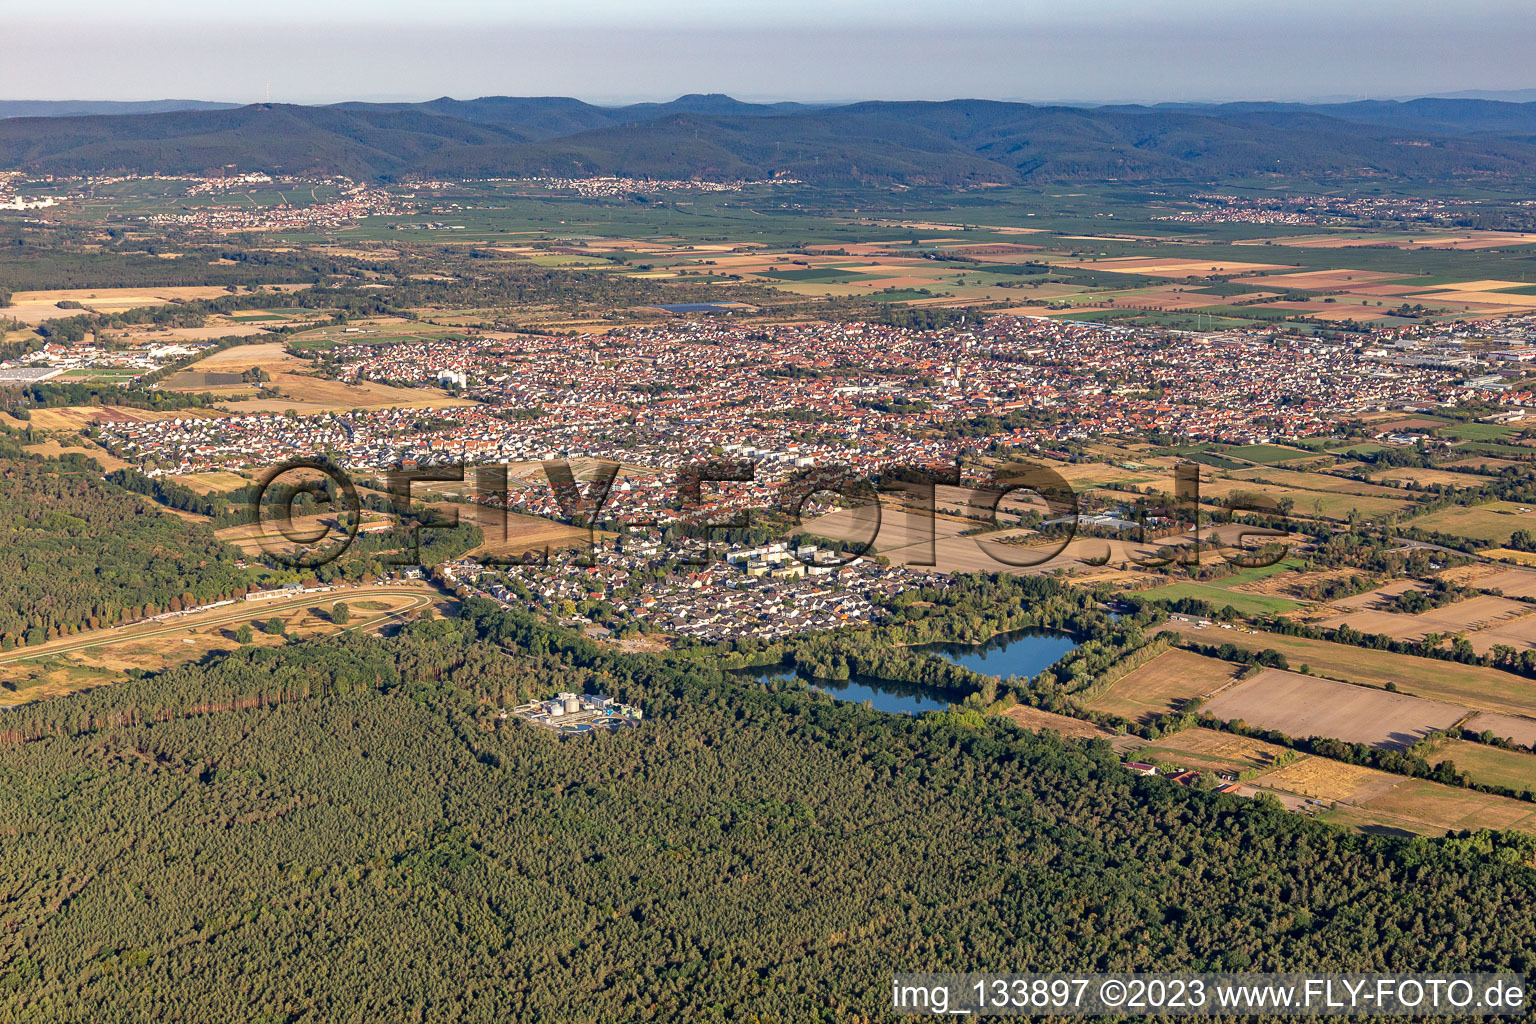 Haßloch in the state Rhineland-Palatinate, Germany out of the air